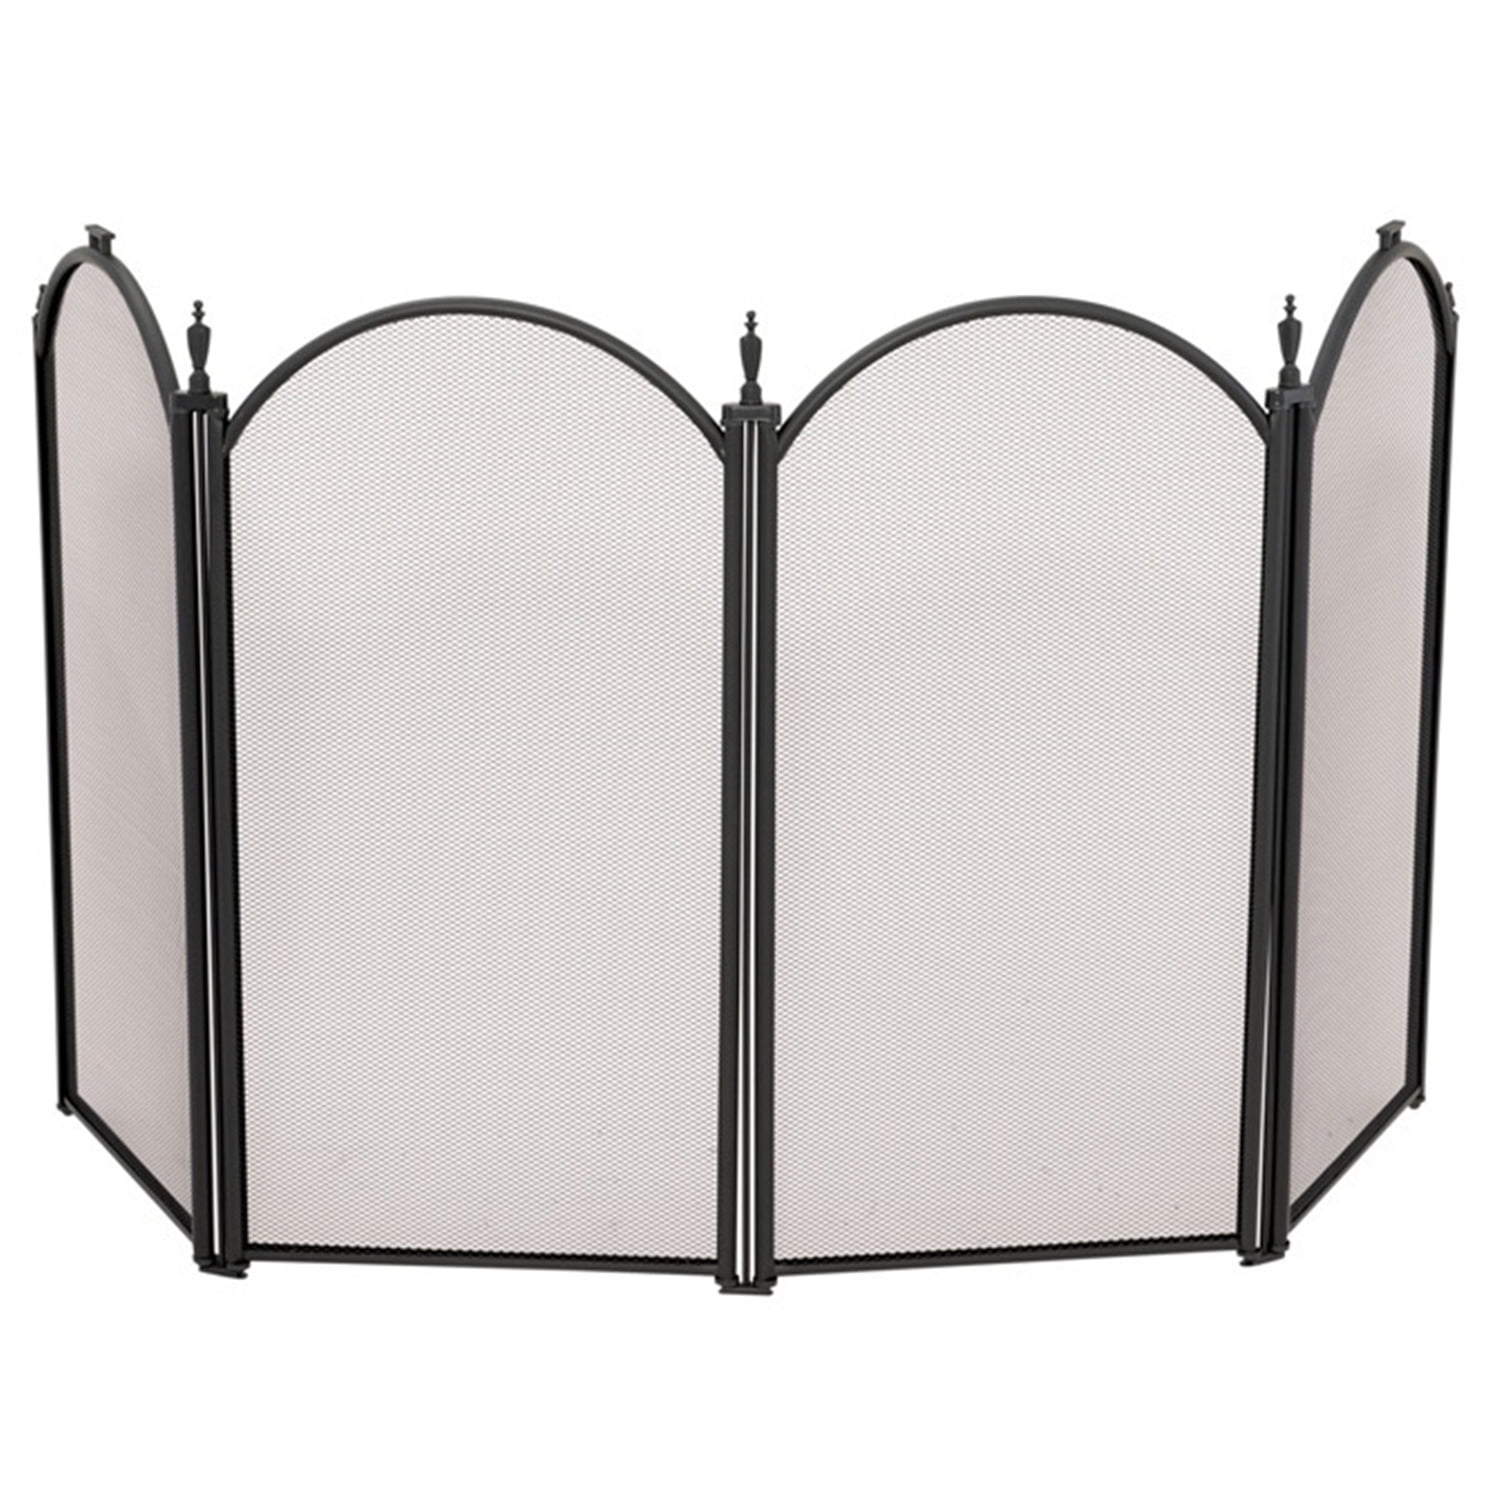 H Home Decor NEW Gothic Fireplace Screen Black Steel 3-Panel 46.5 In L X 31 In 